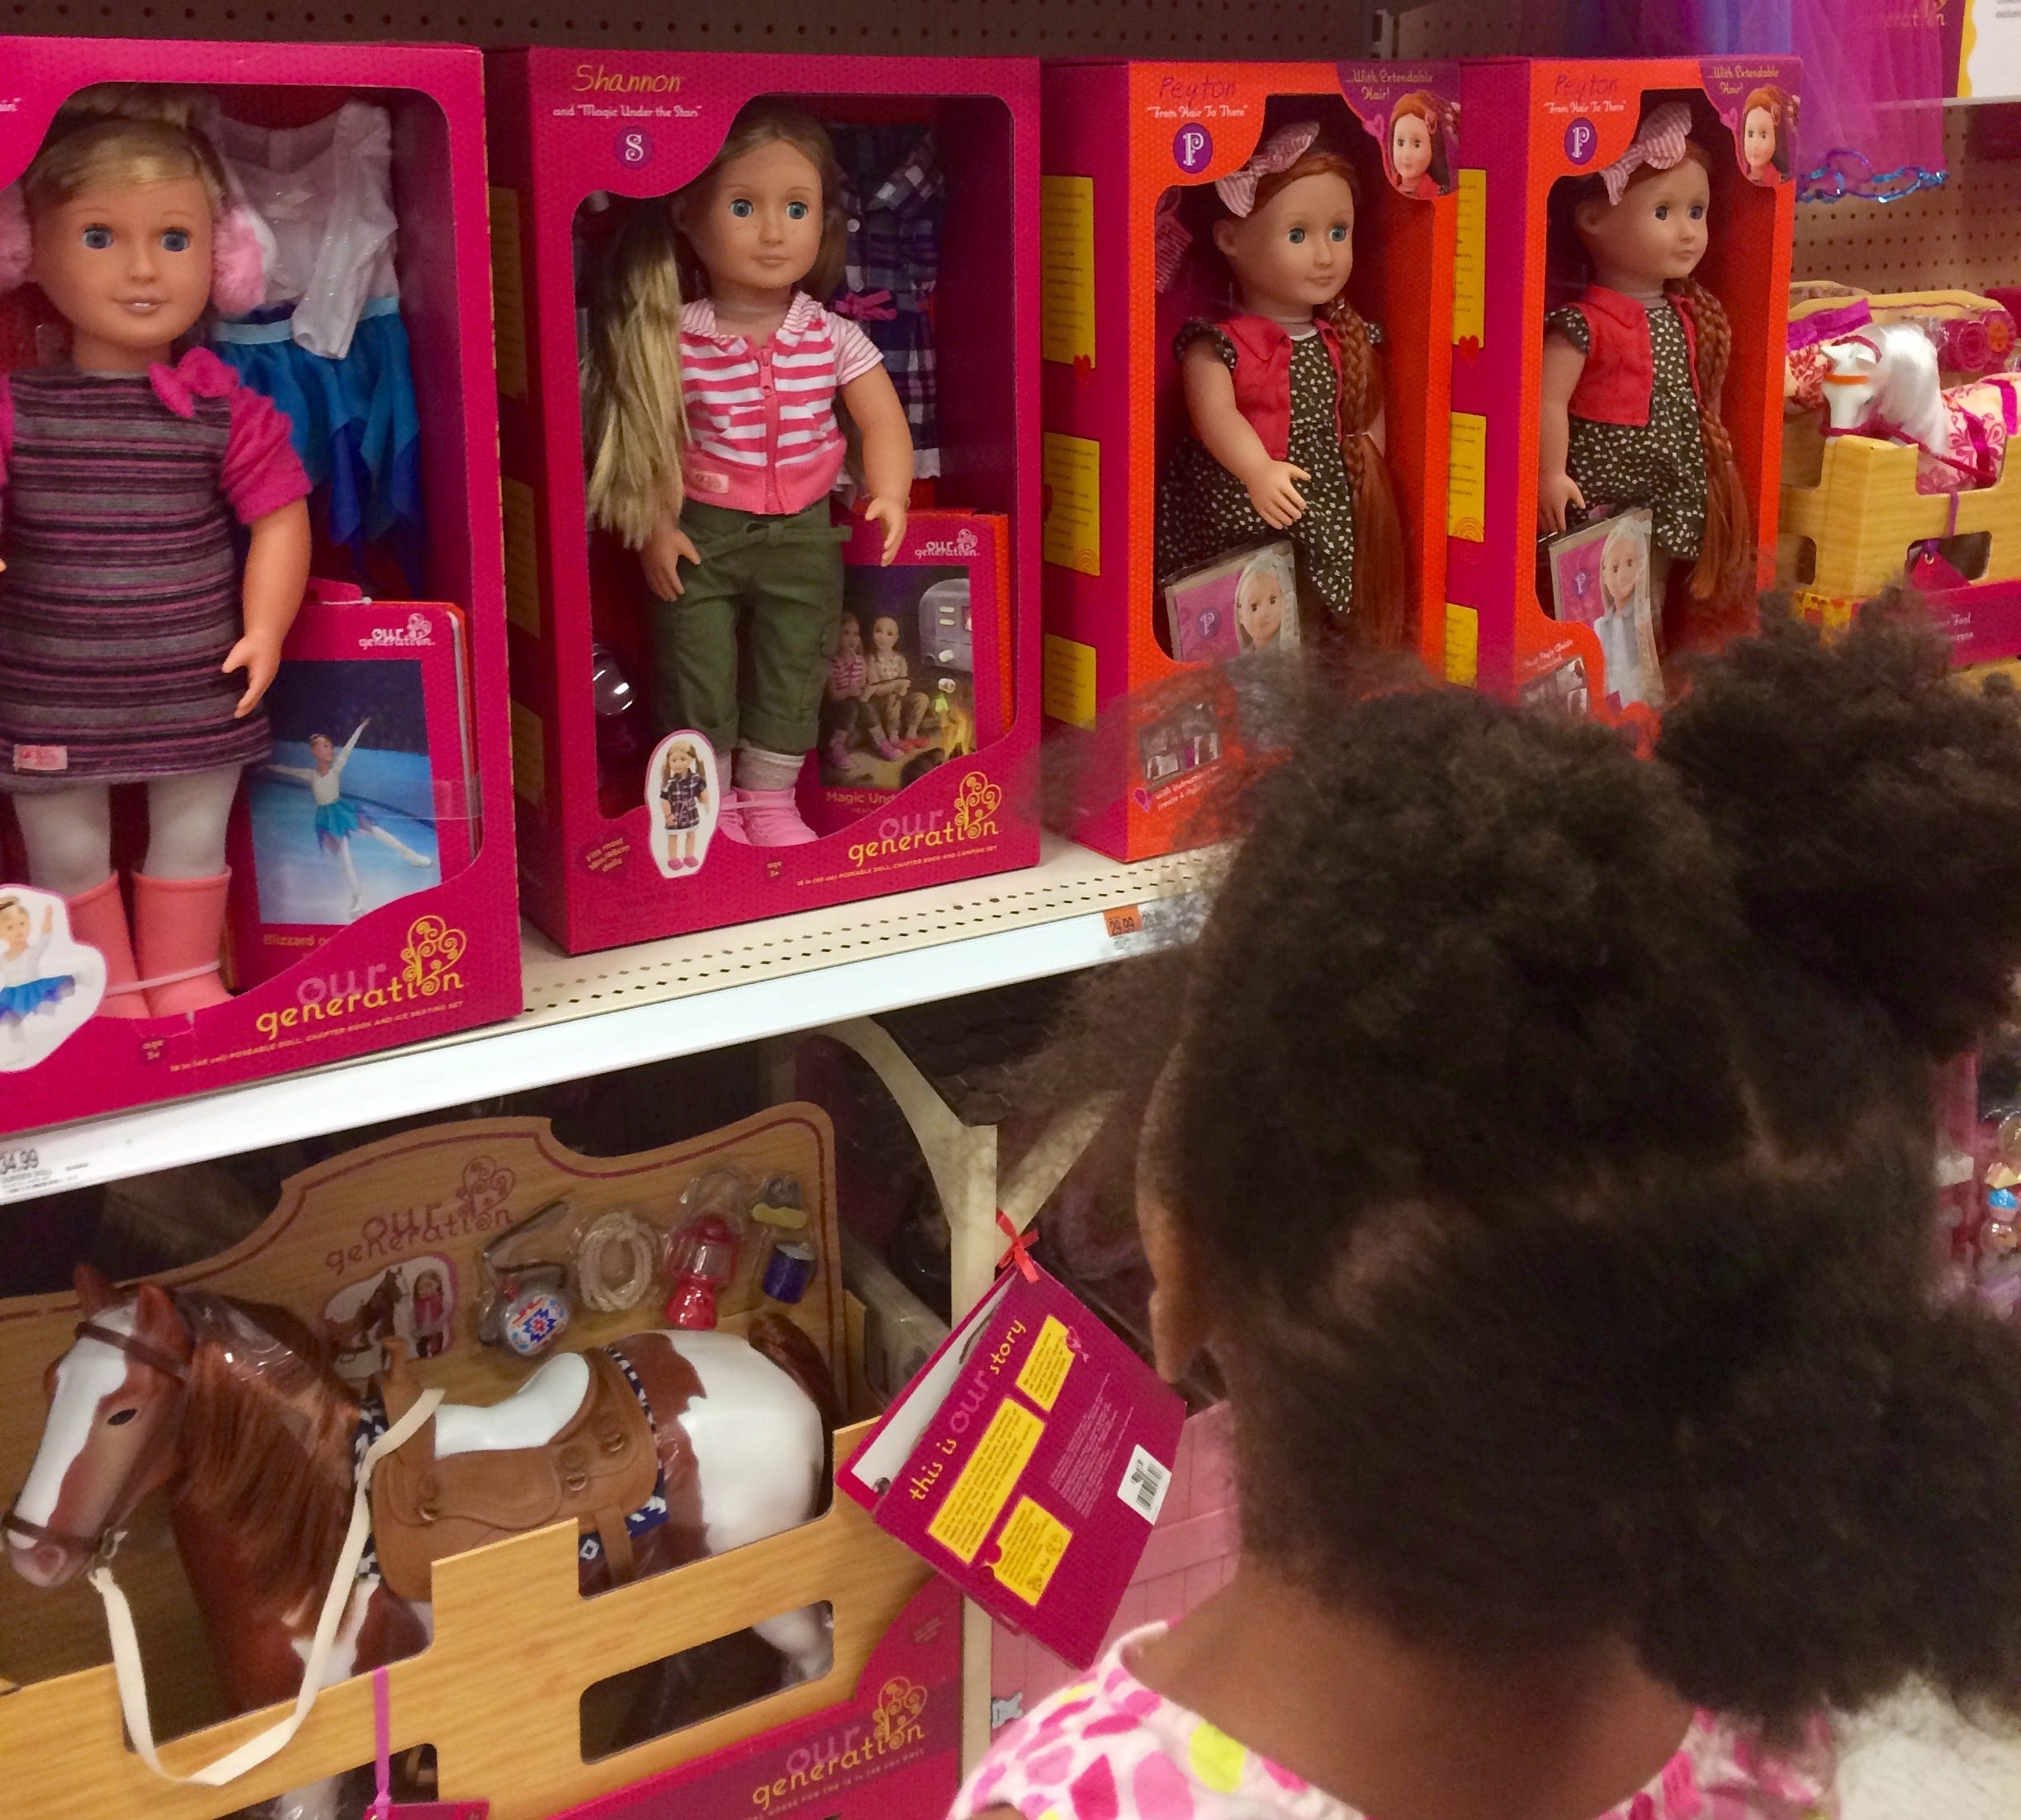 Why Are All The White Dolls Sitting Together On The Target Shelf